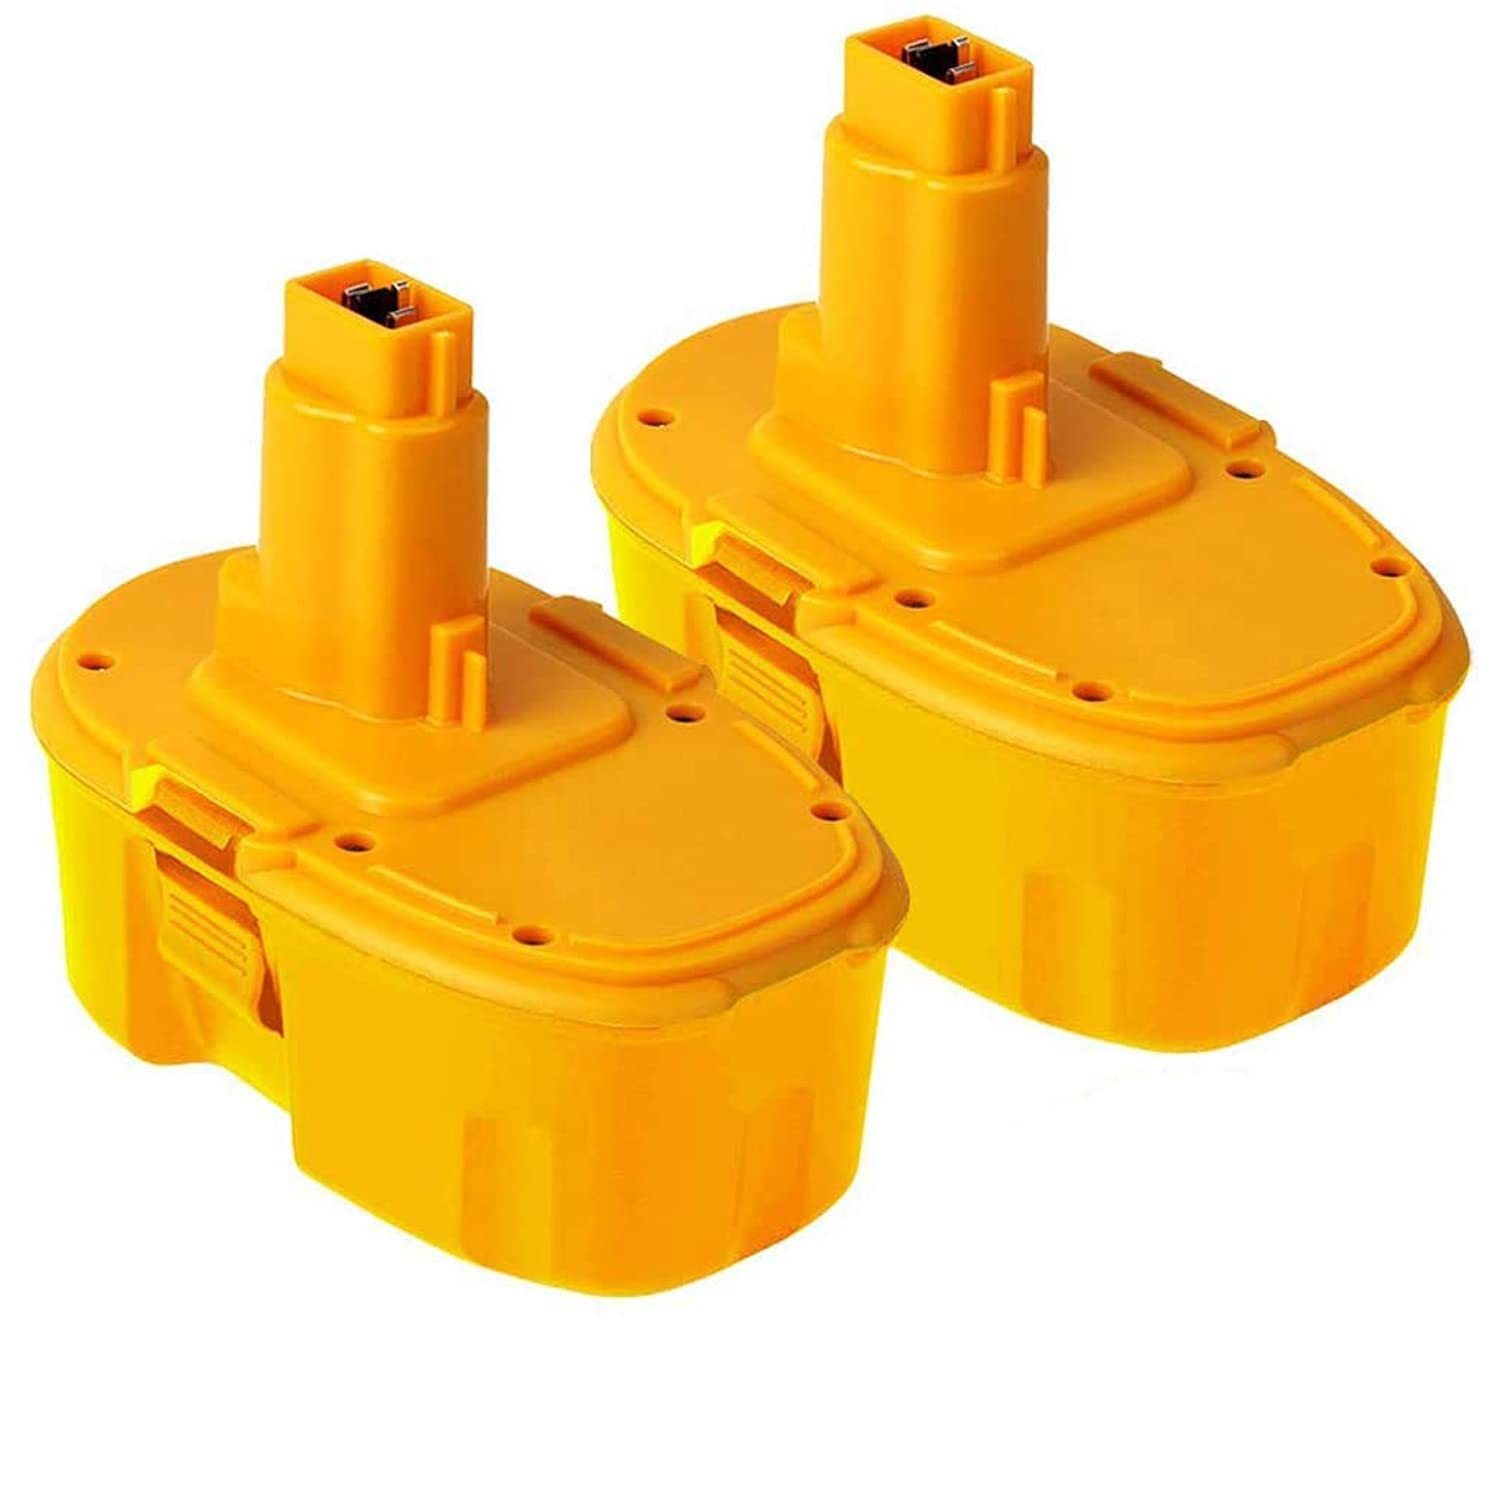 Primary image for 2Pack Ni-Mh 4.0Ah 18V Dc9096 Battery For Dewalt, Battery For Dewalt 38